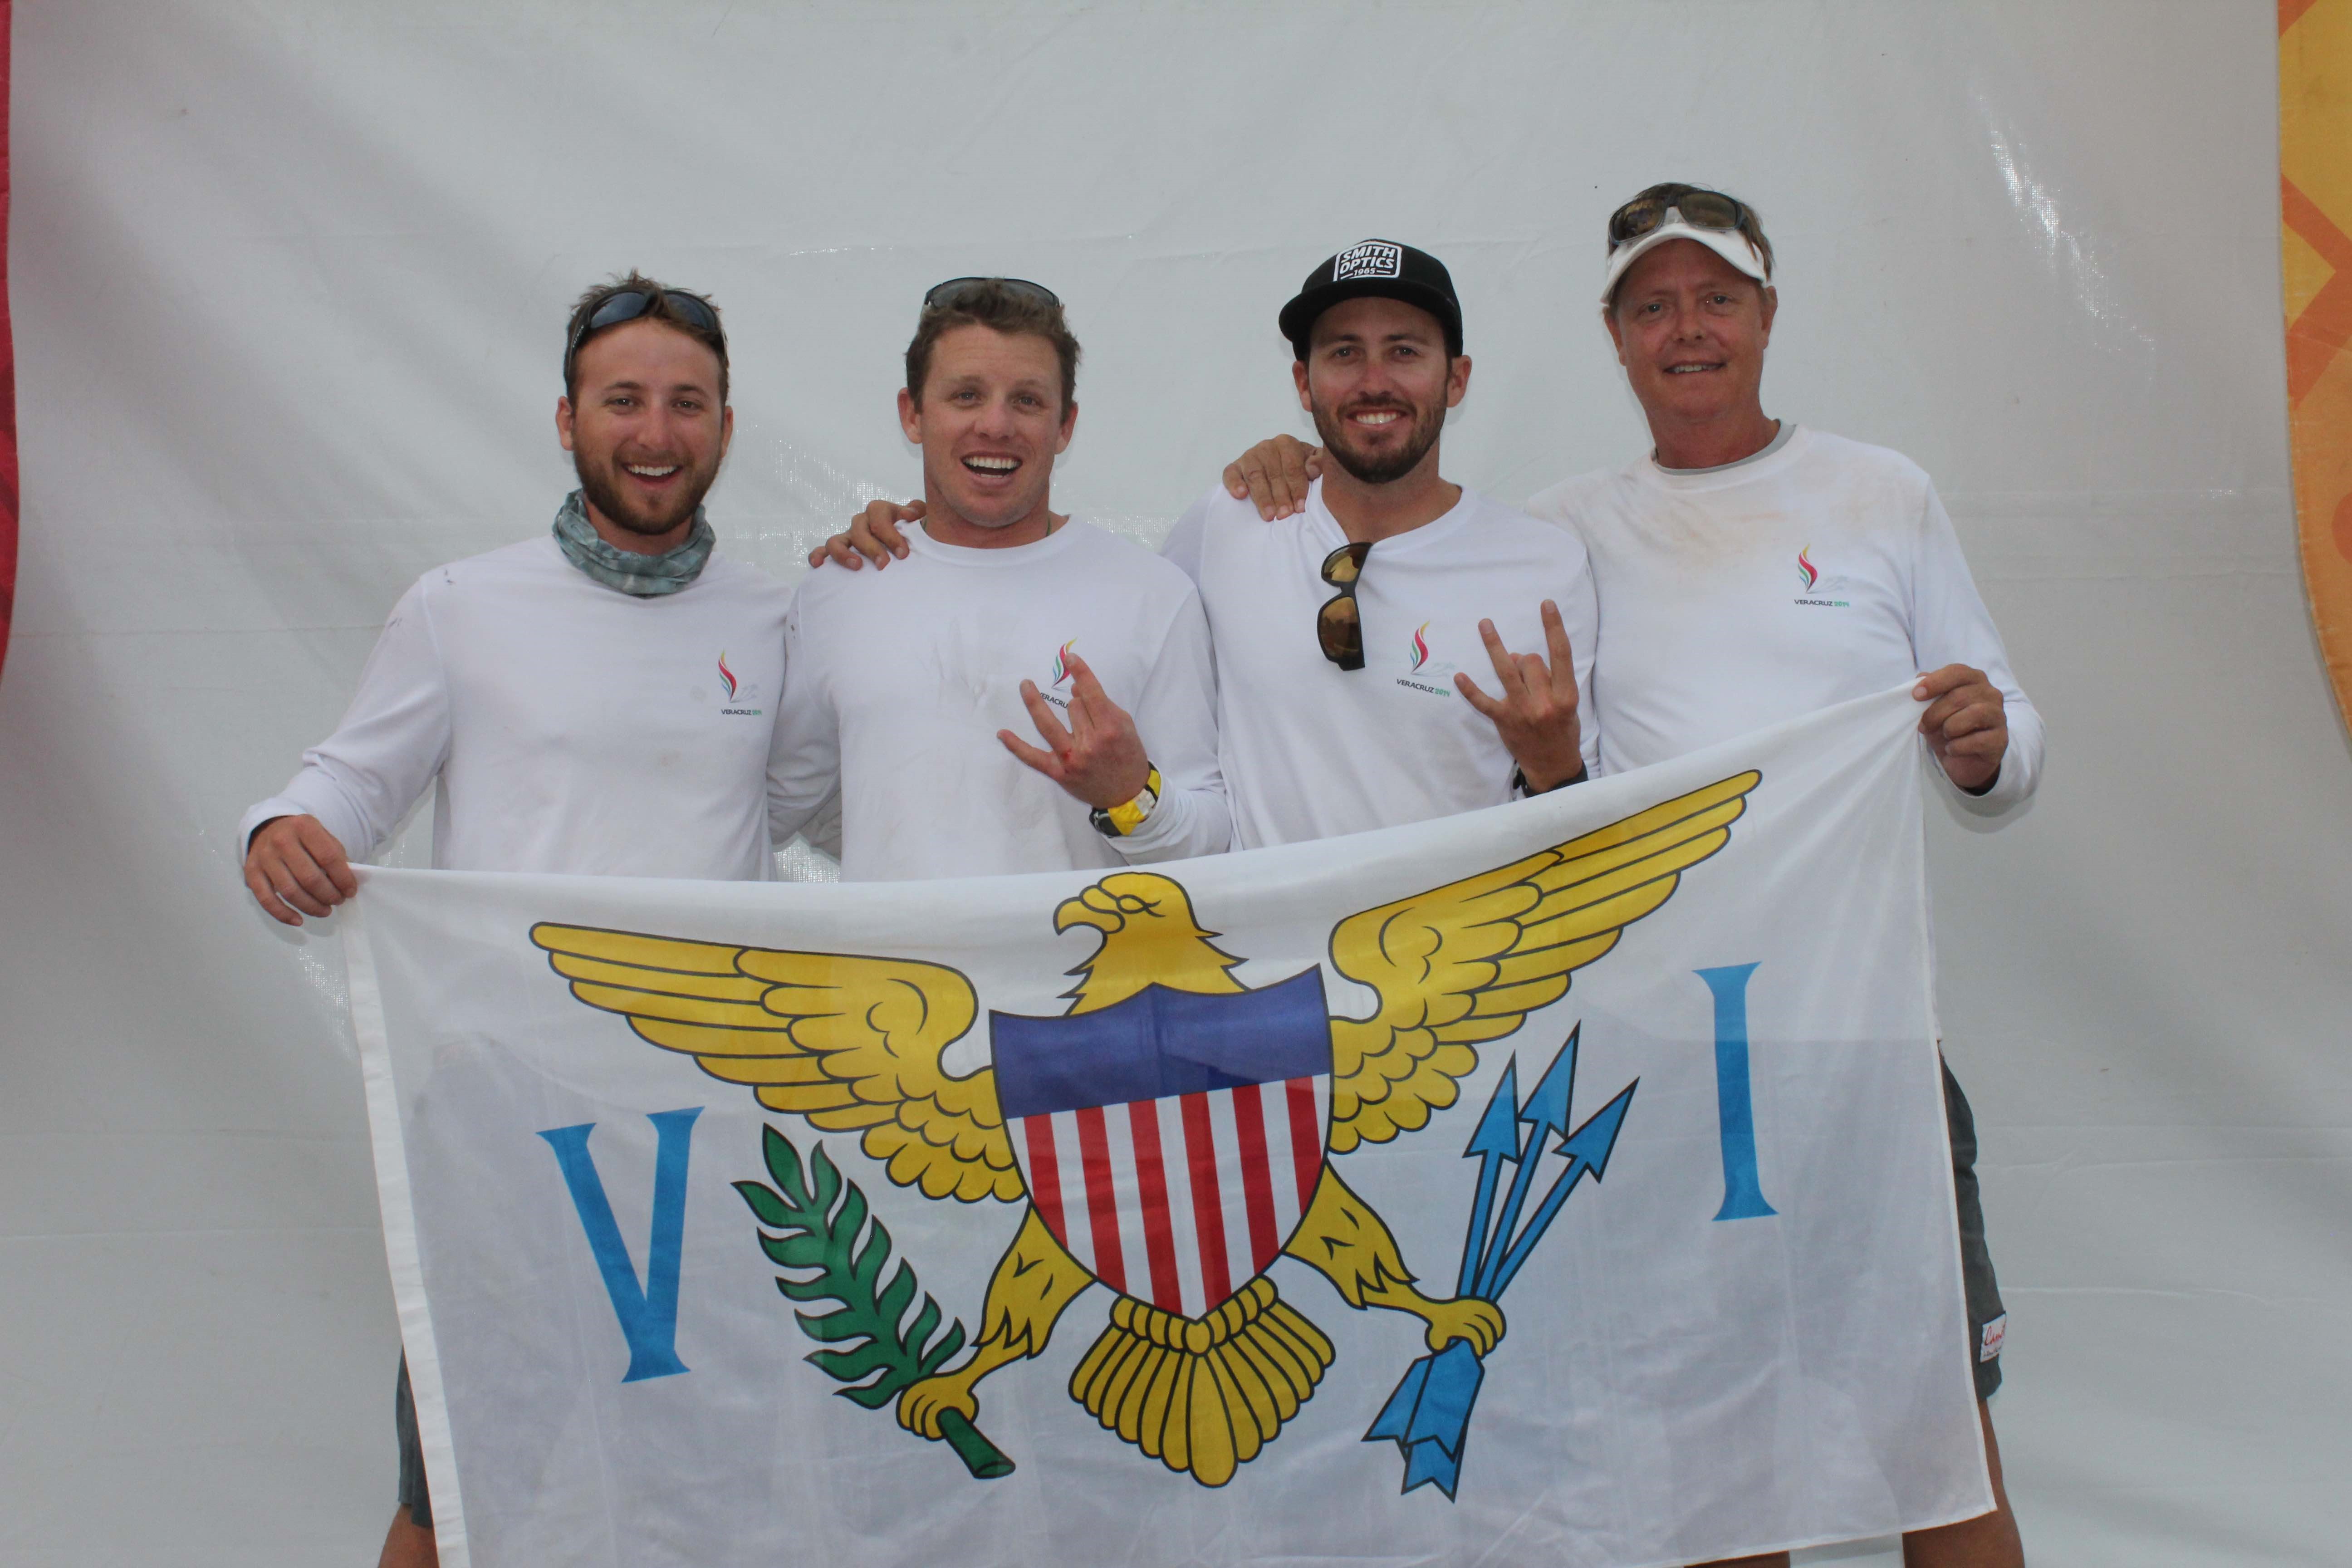 L to R Max Nickbarg, Addison Caproni, Taylor Canfield, Phillip Shannon at 2014 Central American and Caribbean Games (Credit Courtesy VISA)